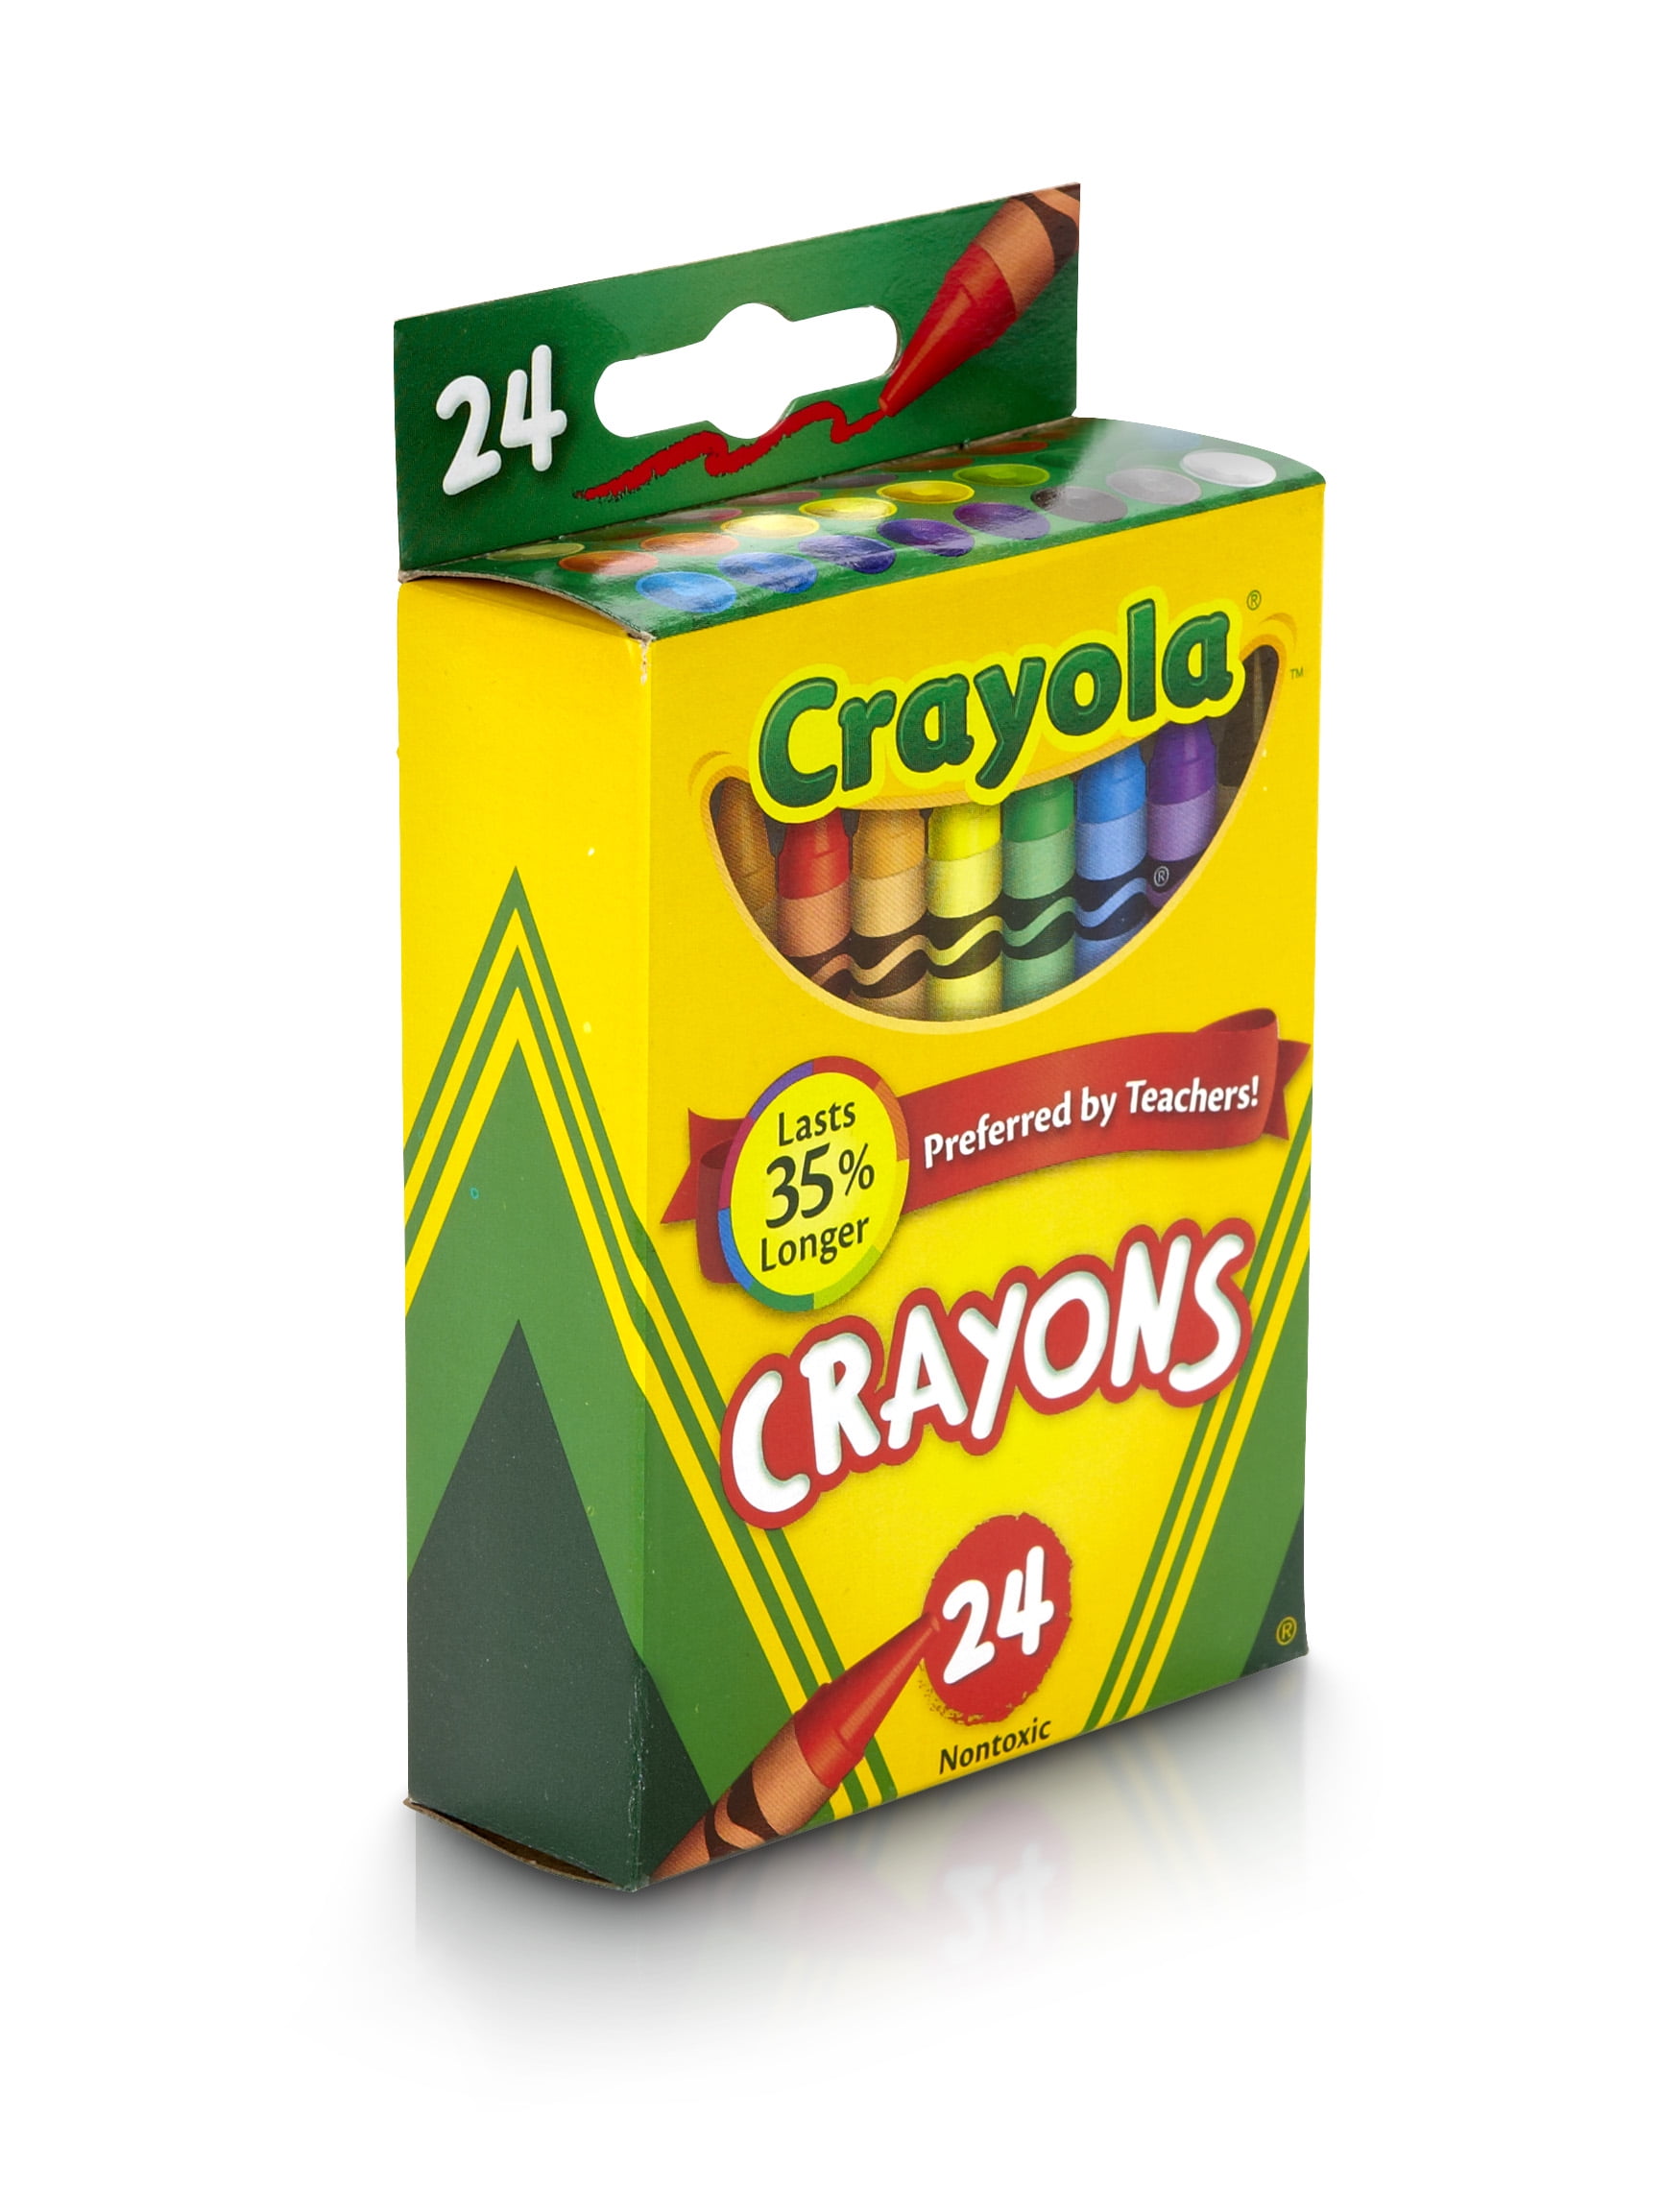  Bedwina Bulk Crayons - 288 Crayons! Case Of 72 4-Packs, Premium  Color Crayons for Kids and Toddlers, Non-Toxic, for Party Favors,  Restaurants, Goody Bags, Stocking Stuffers : Toys & Games